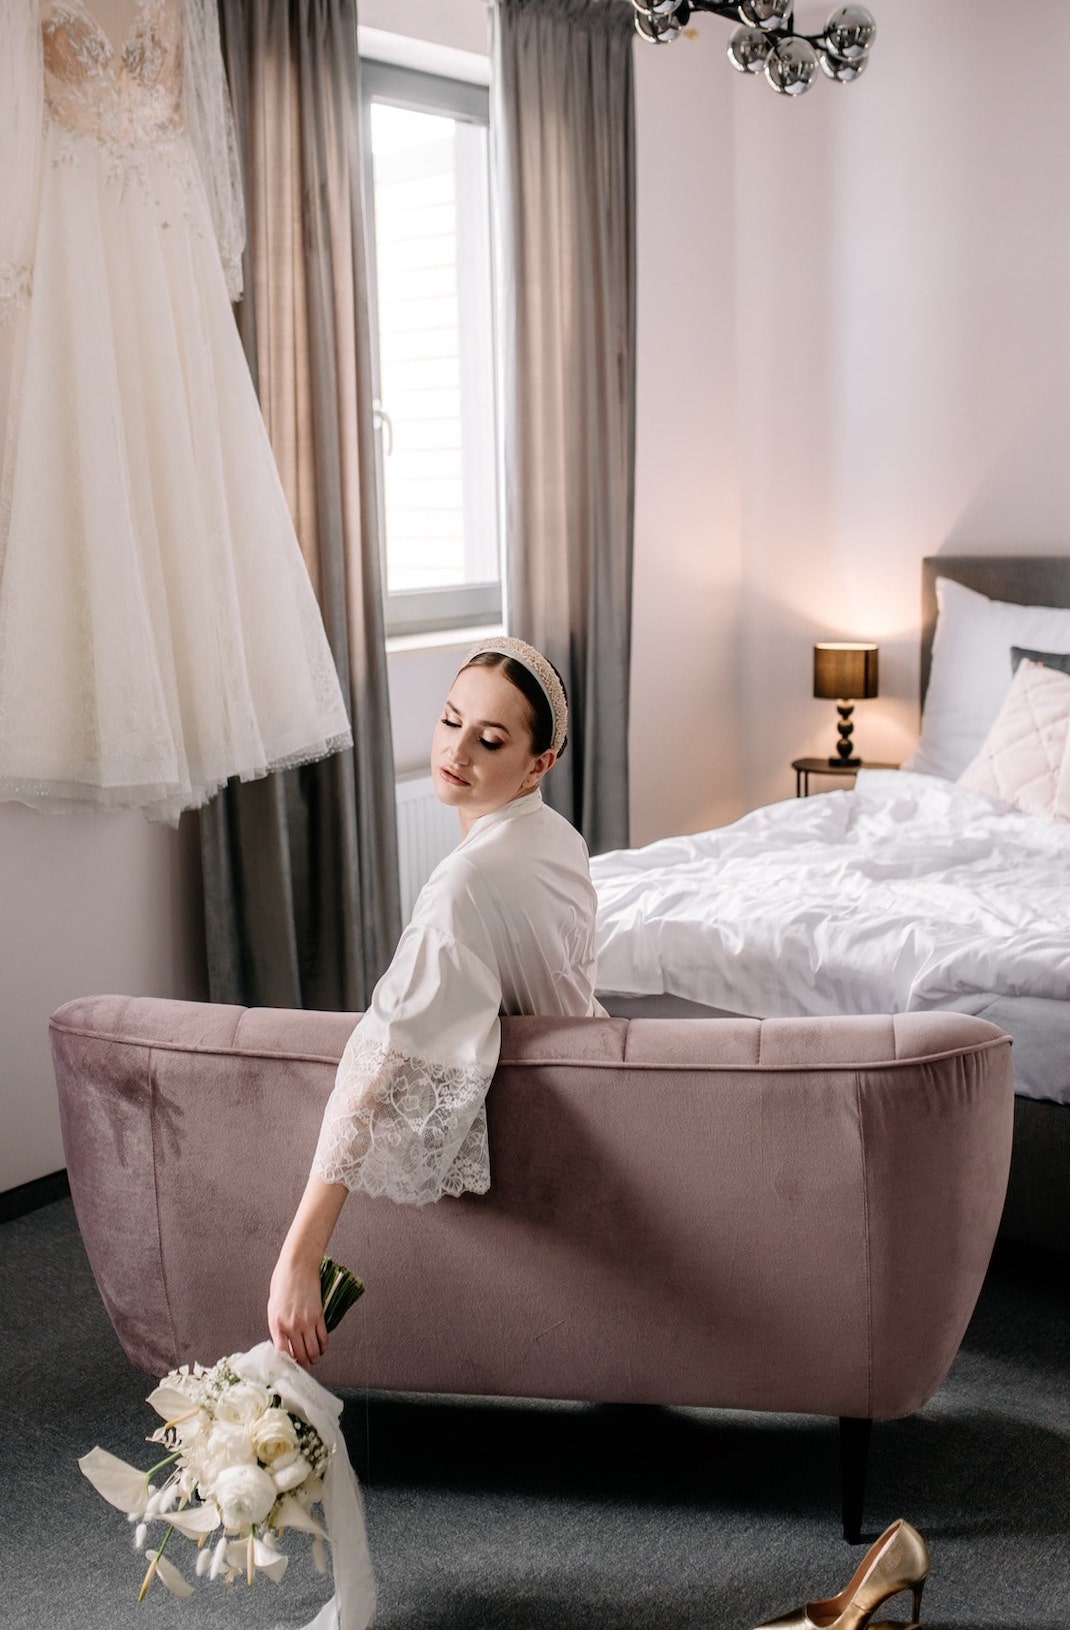 A bride -to-be in a hotel room